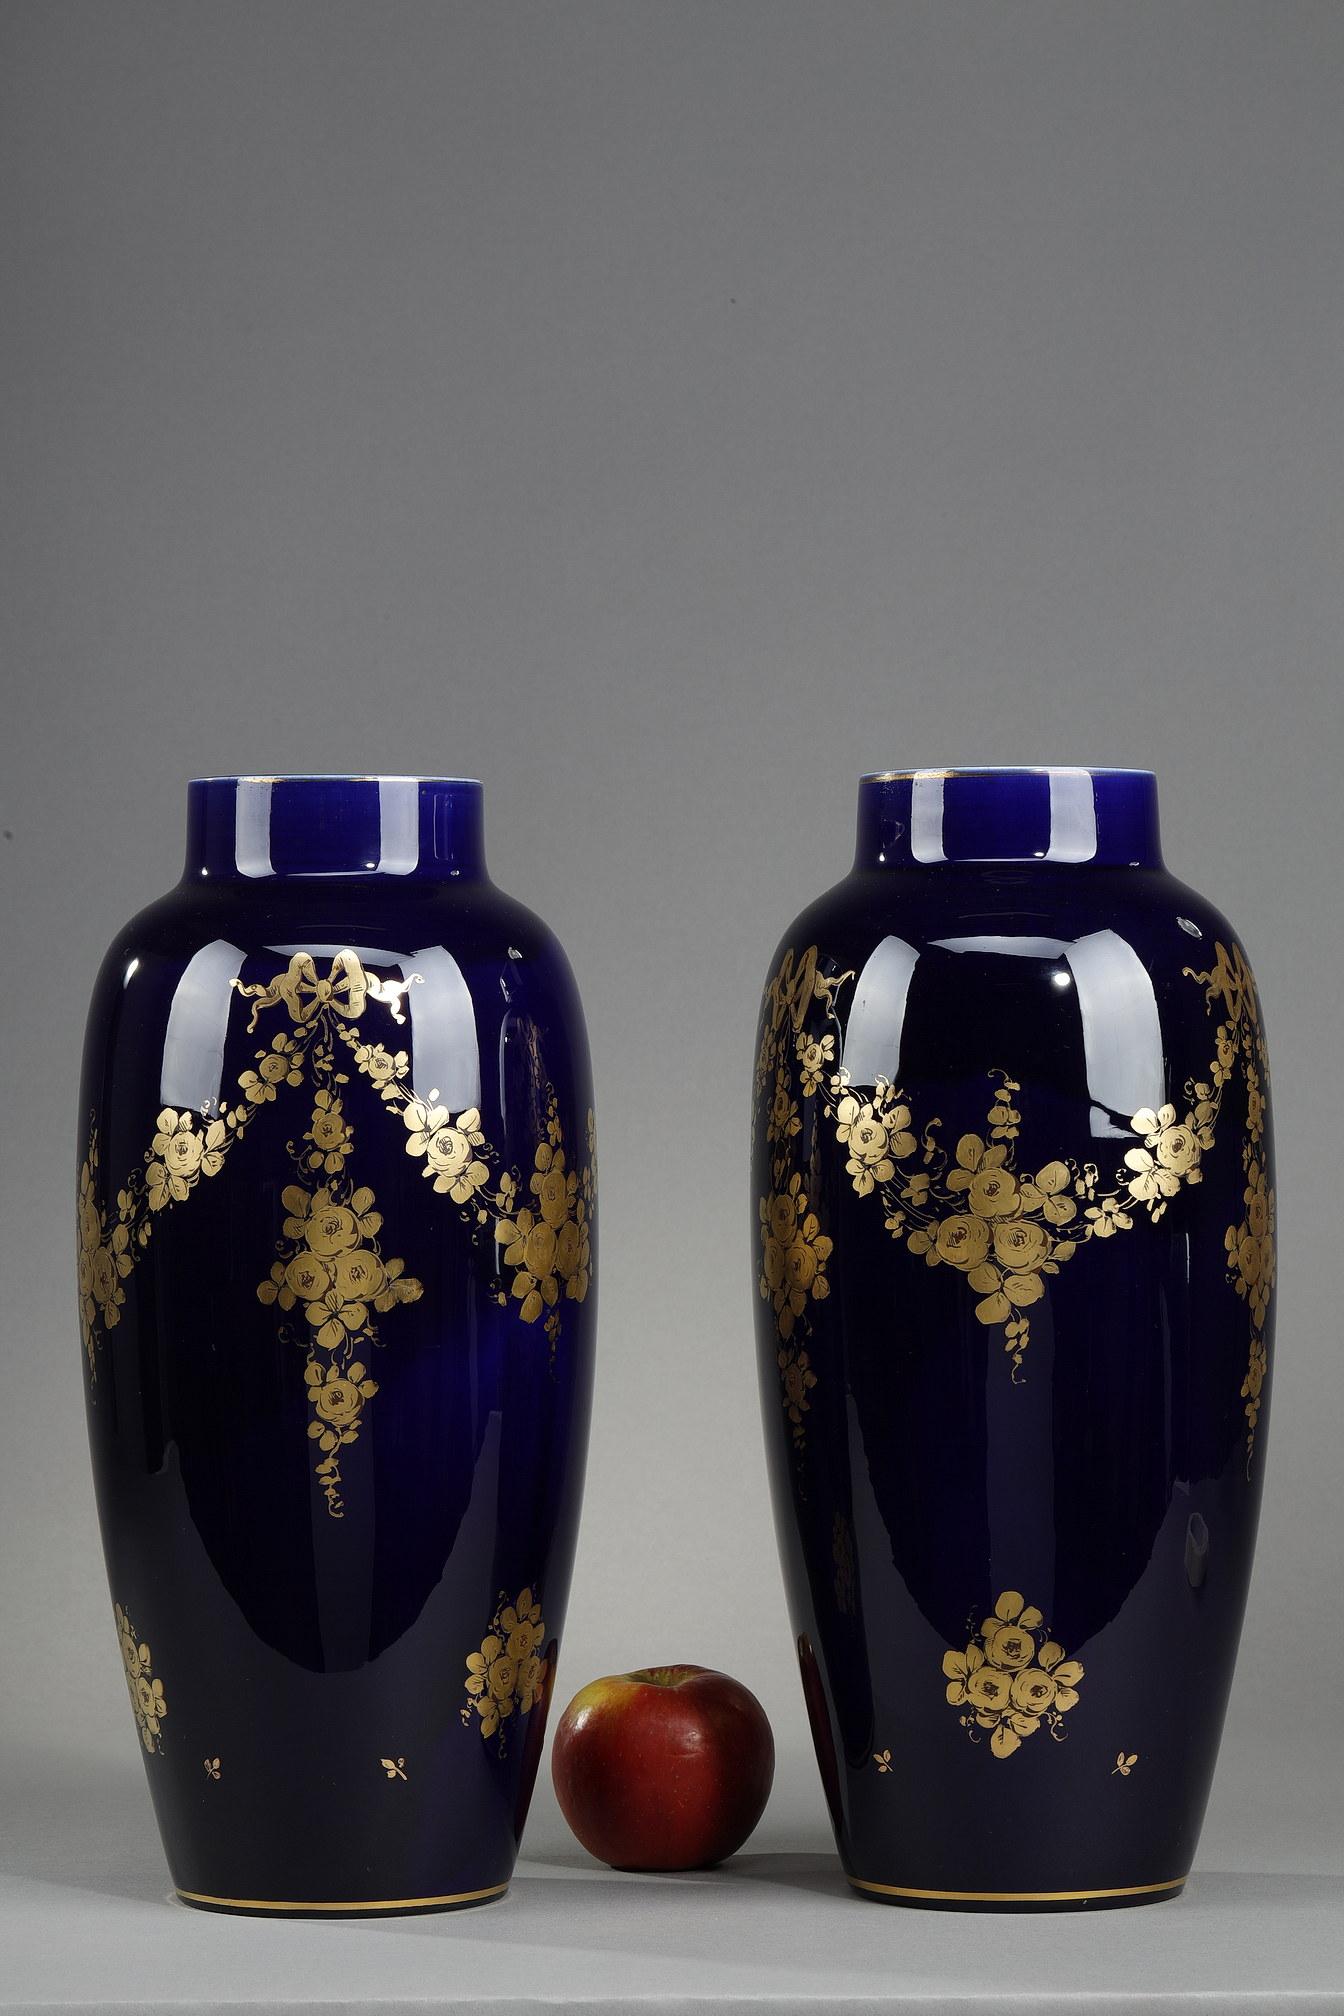 Pair of 1900 vases in blue porcelain of Tours with gilded decoration of roses topped by ribbons. These gold-coloured motifs are typical of the Art Nouveau decorations of the ceramist Frederic Gustave Asch (1856-1911). Active towards the end of the